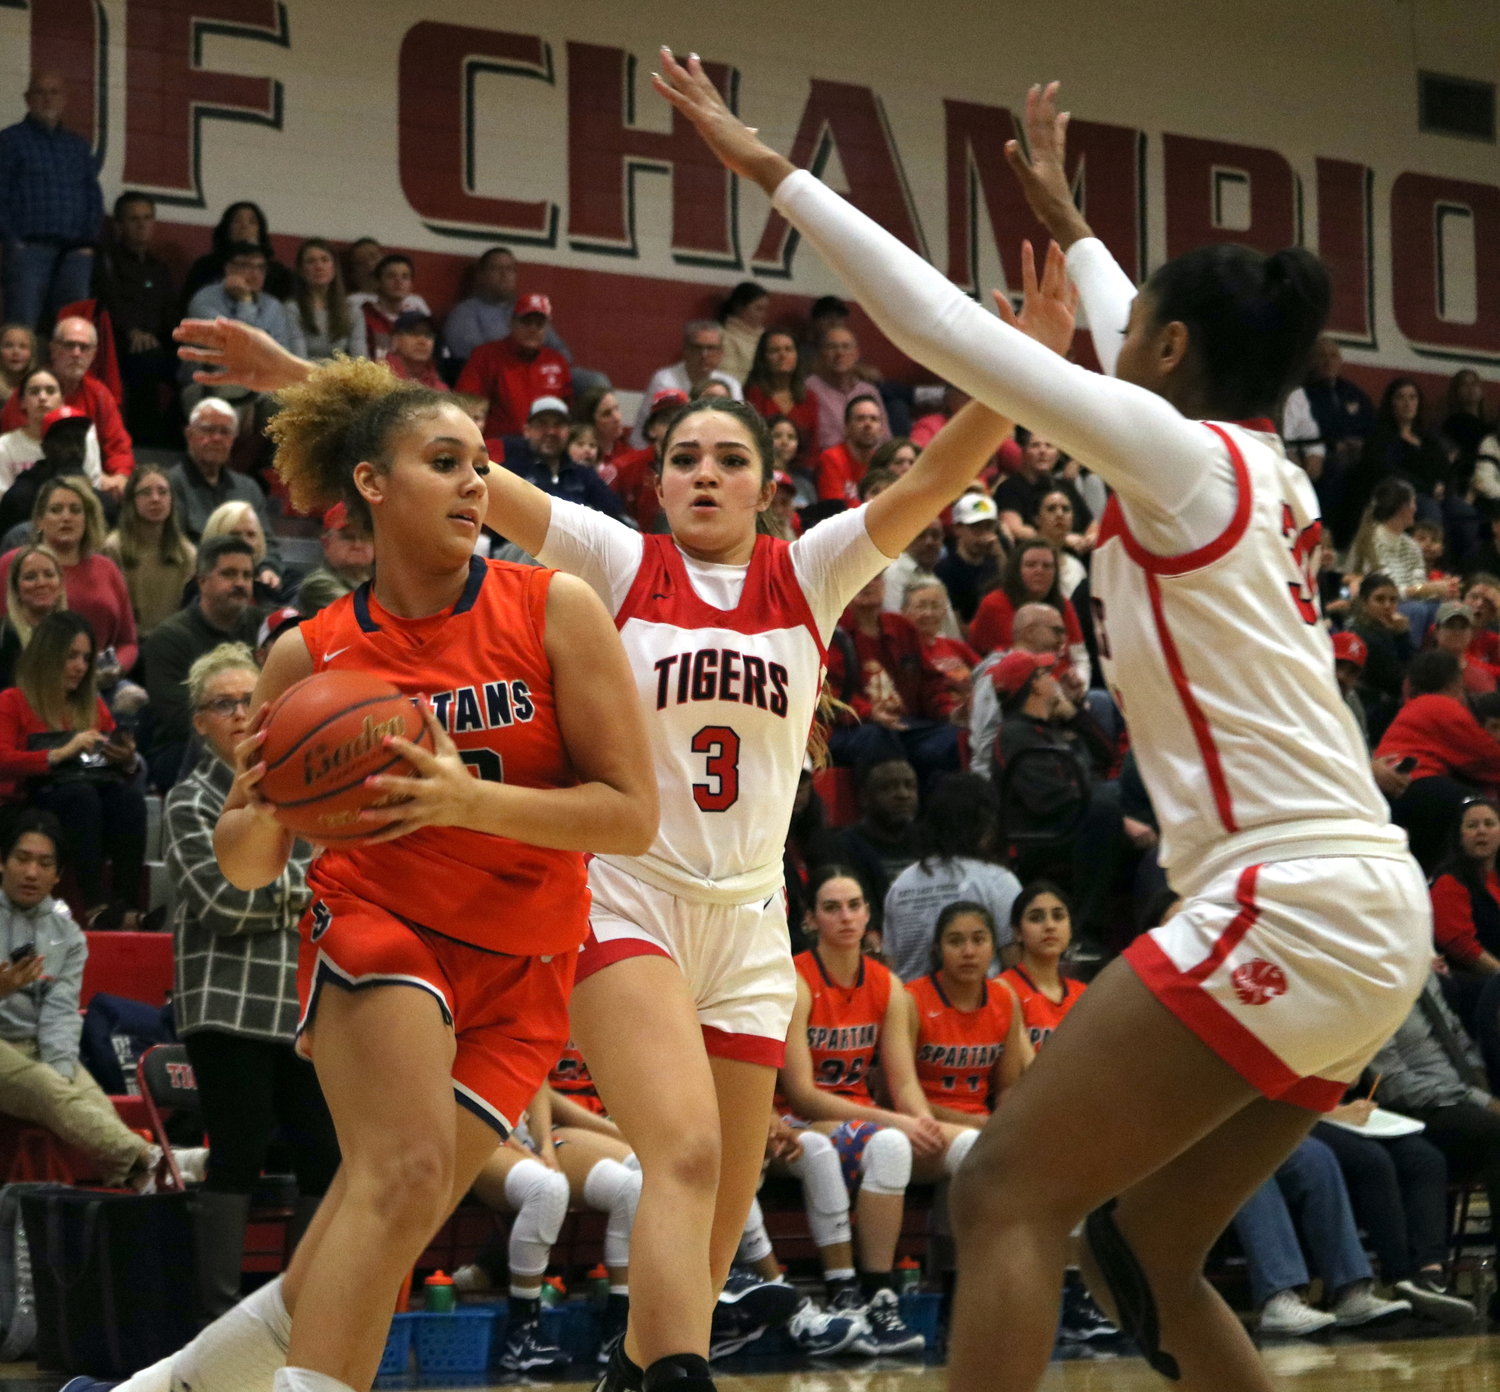 Justice Carlton drives between two defenders during Friday's game between Seven Lakes and Katy at the Katy gym.